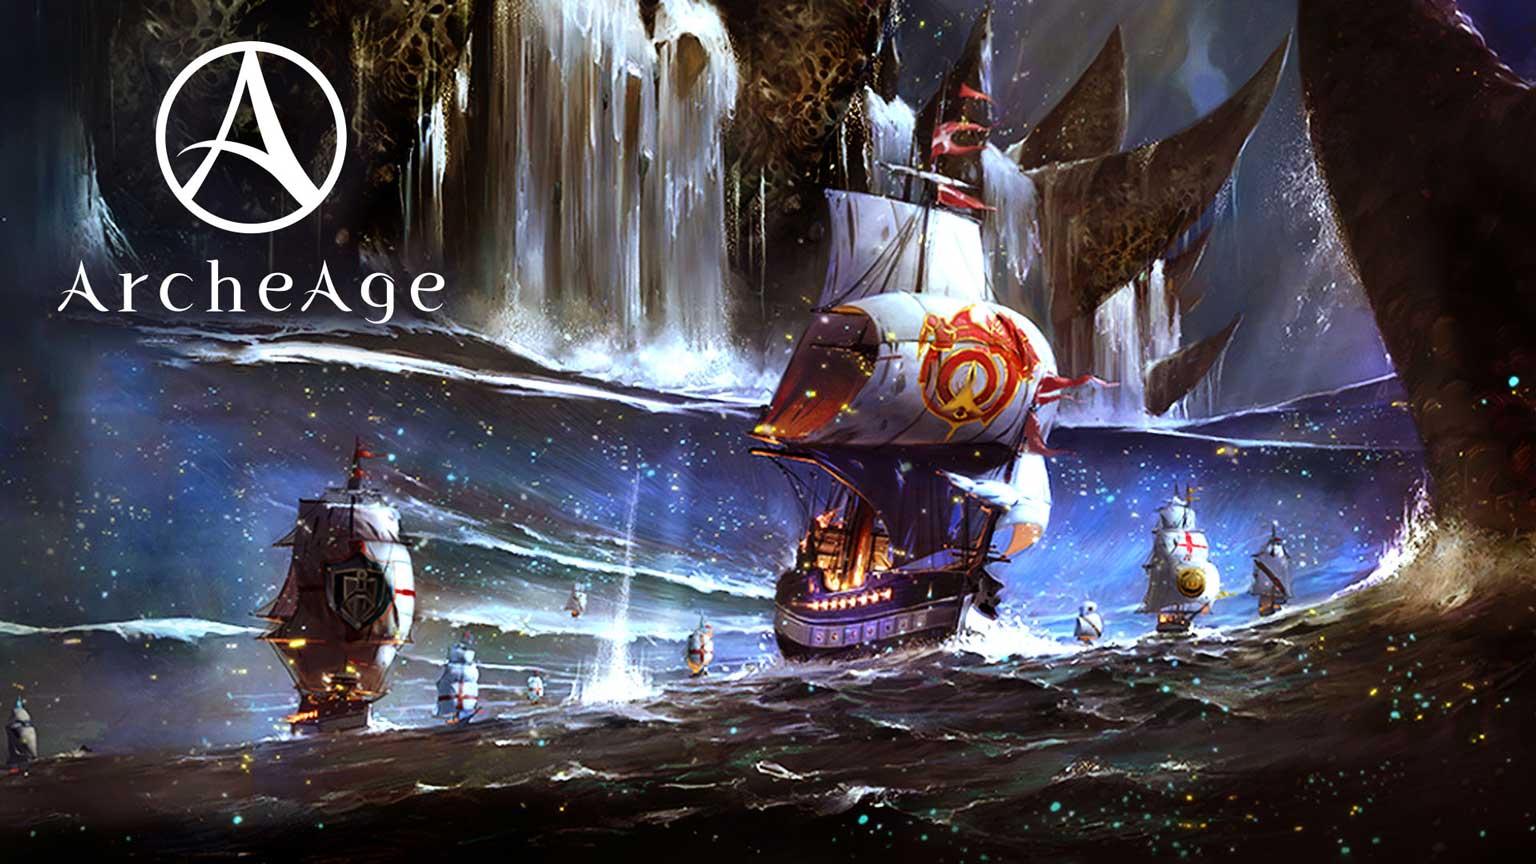 ArcheAge leaving Steam and Glyph Dec 1st carrying on with new publisher   Delisted Games